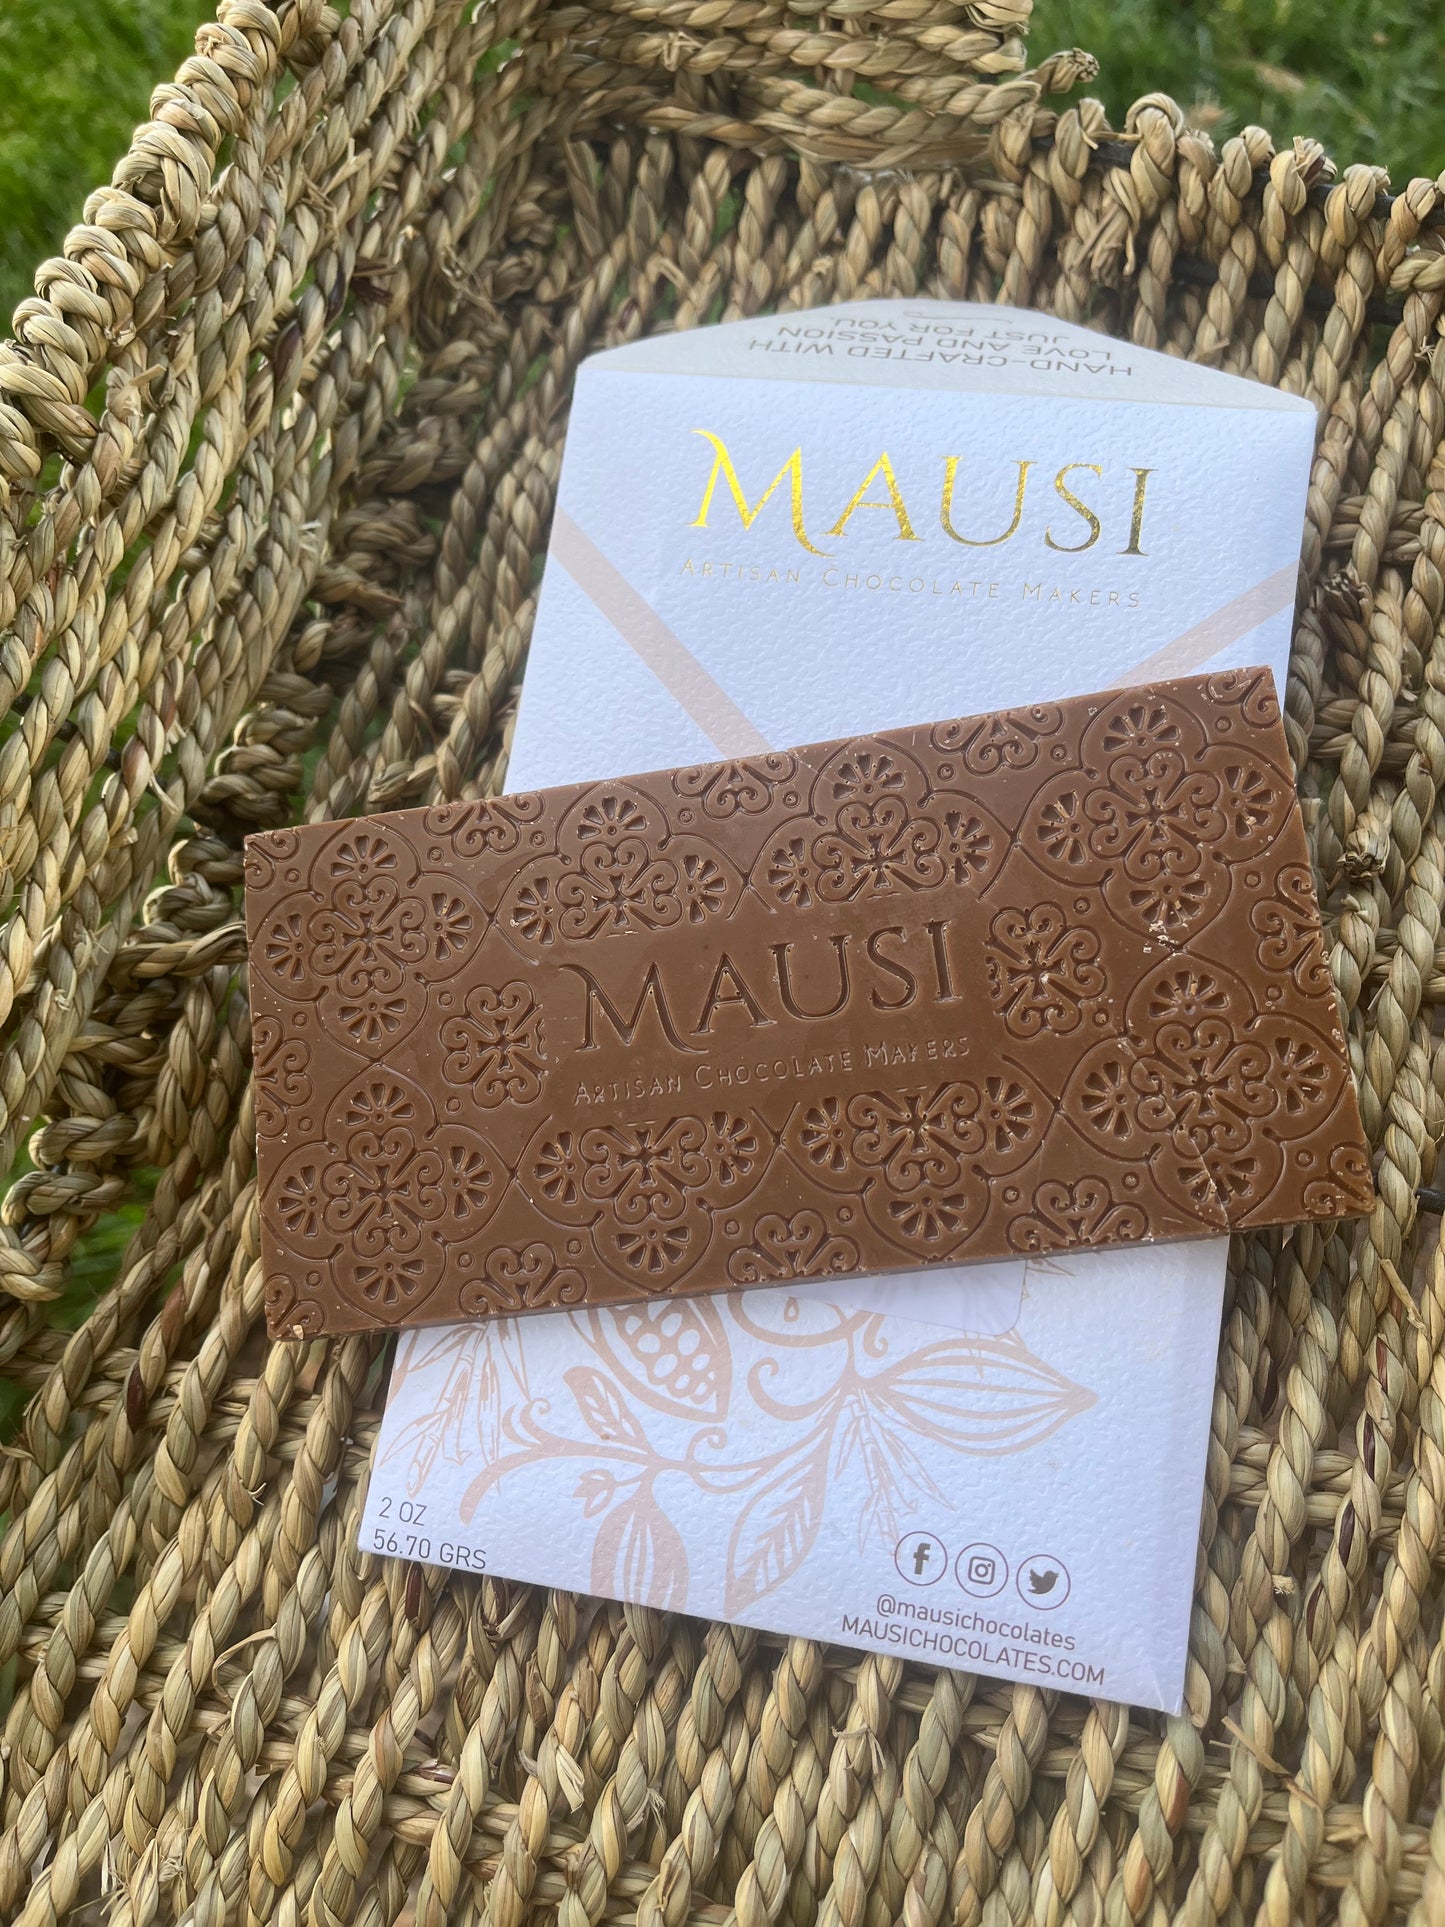 Mausi White Chocolate infused with coffee